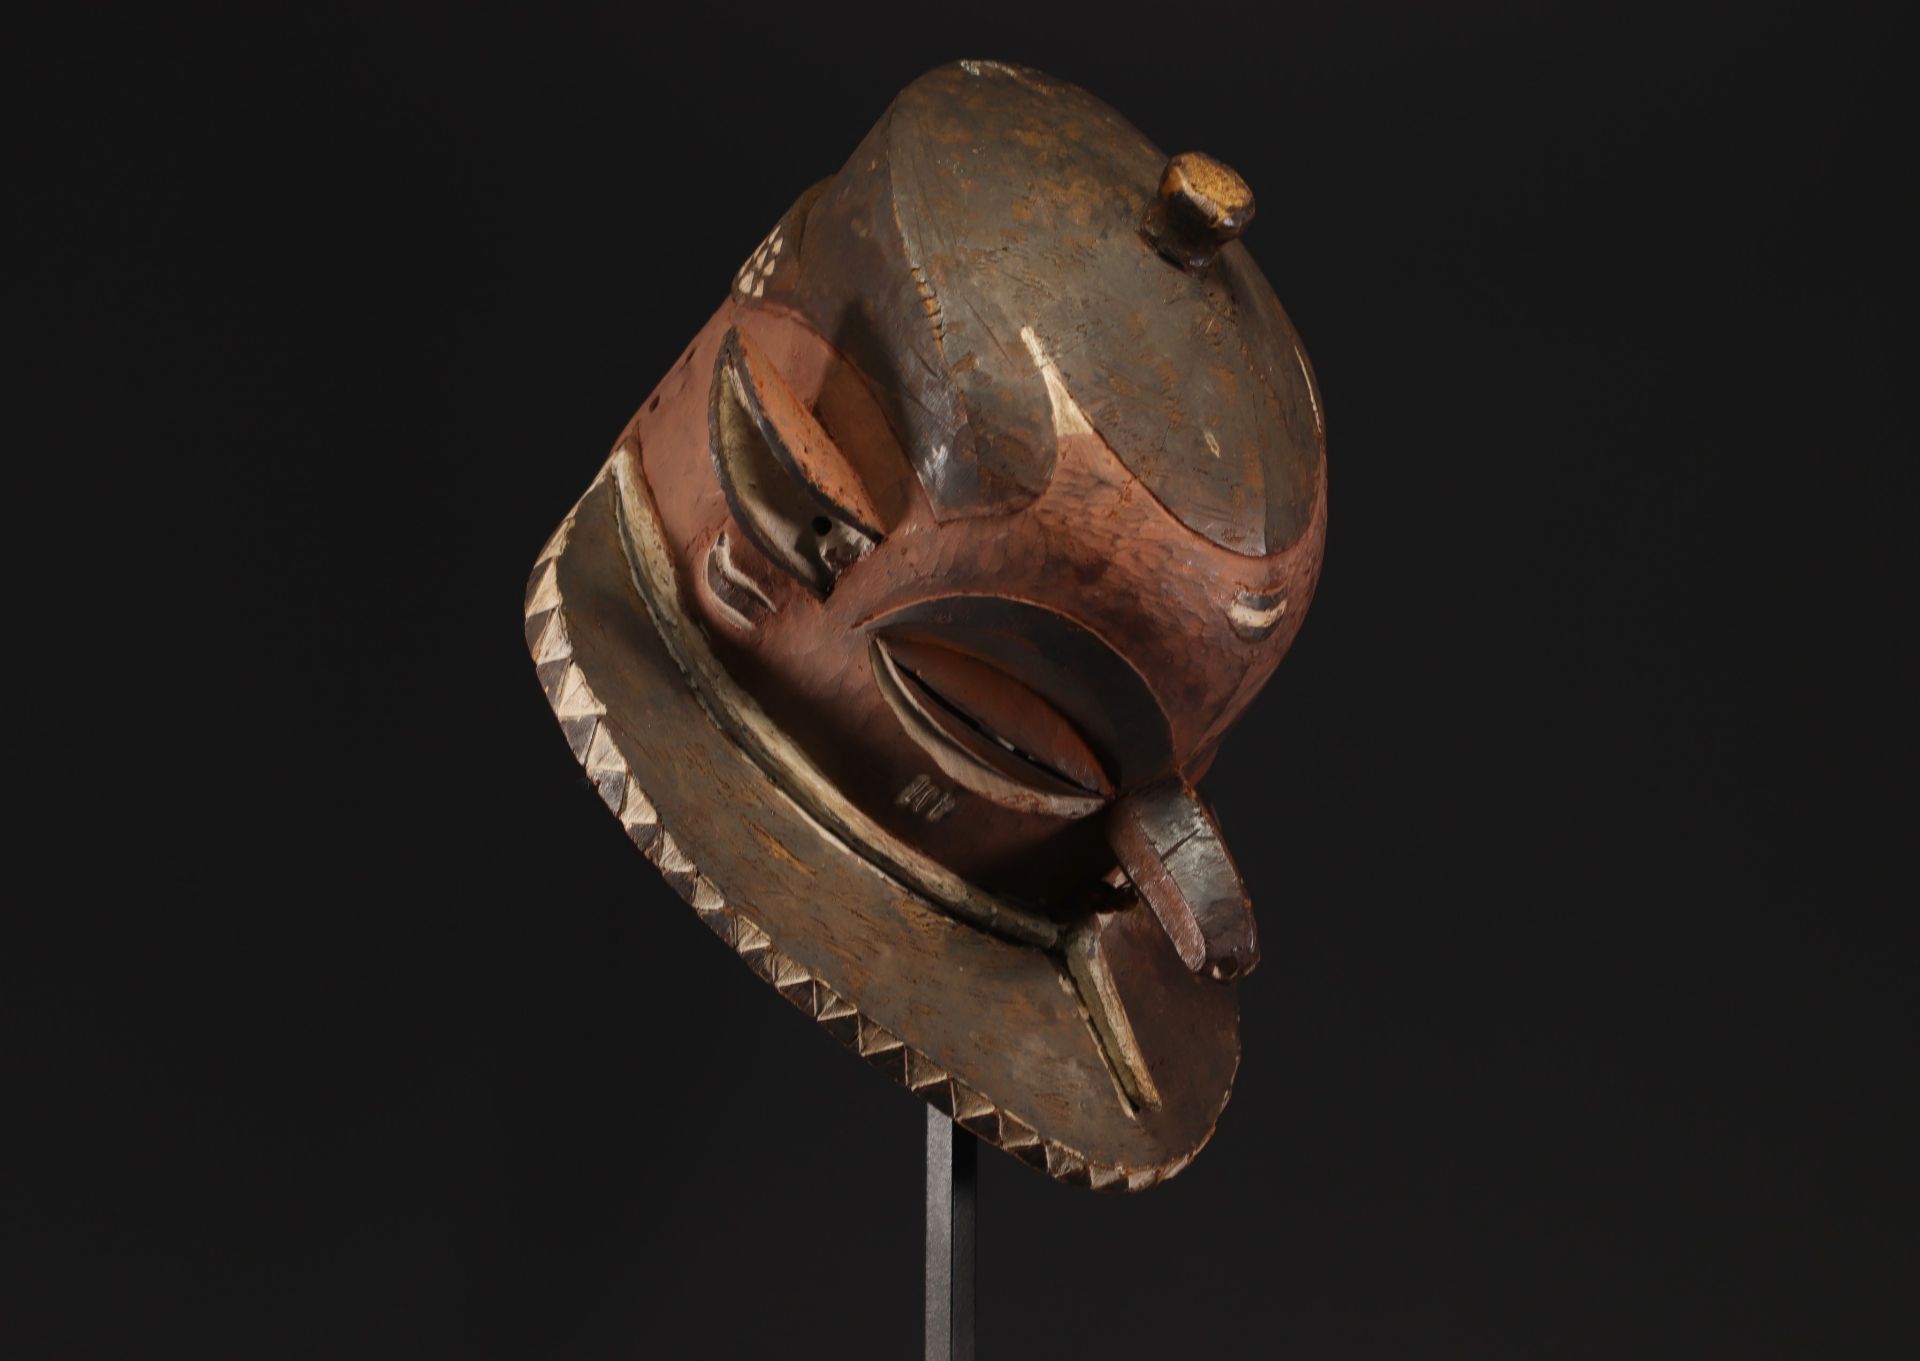 Eastern Pende mask - Dem.Rep.Congo - Image 5 of 7